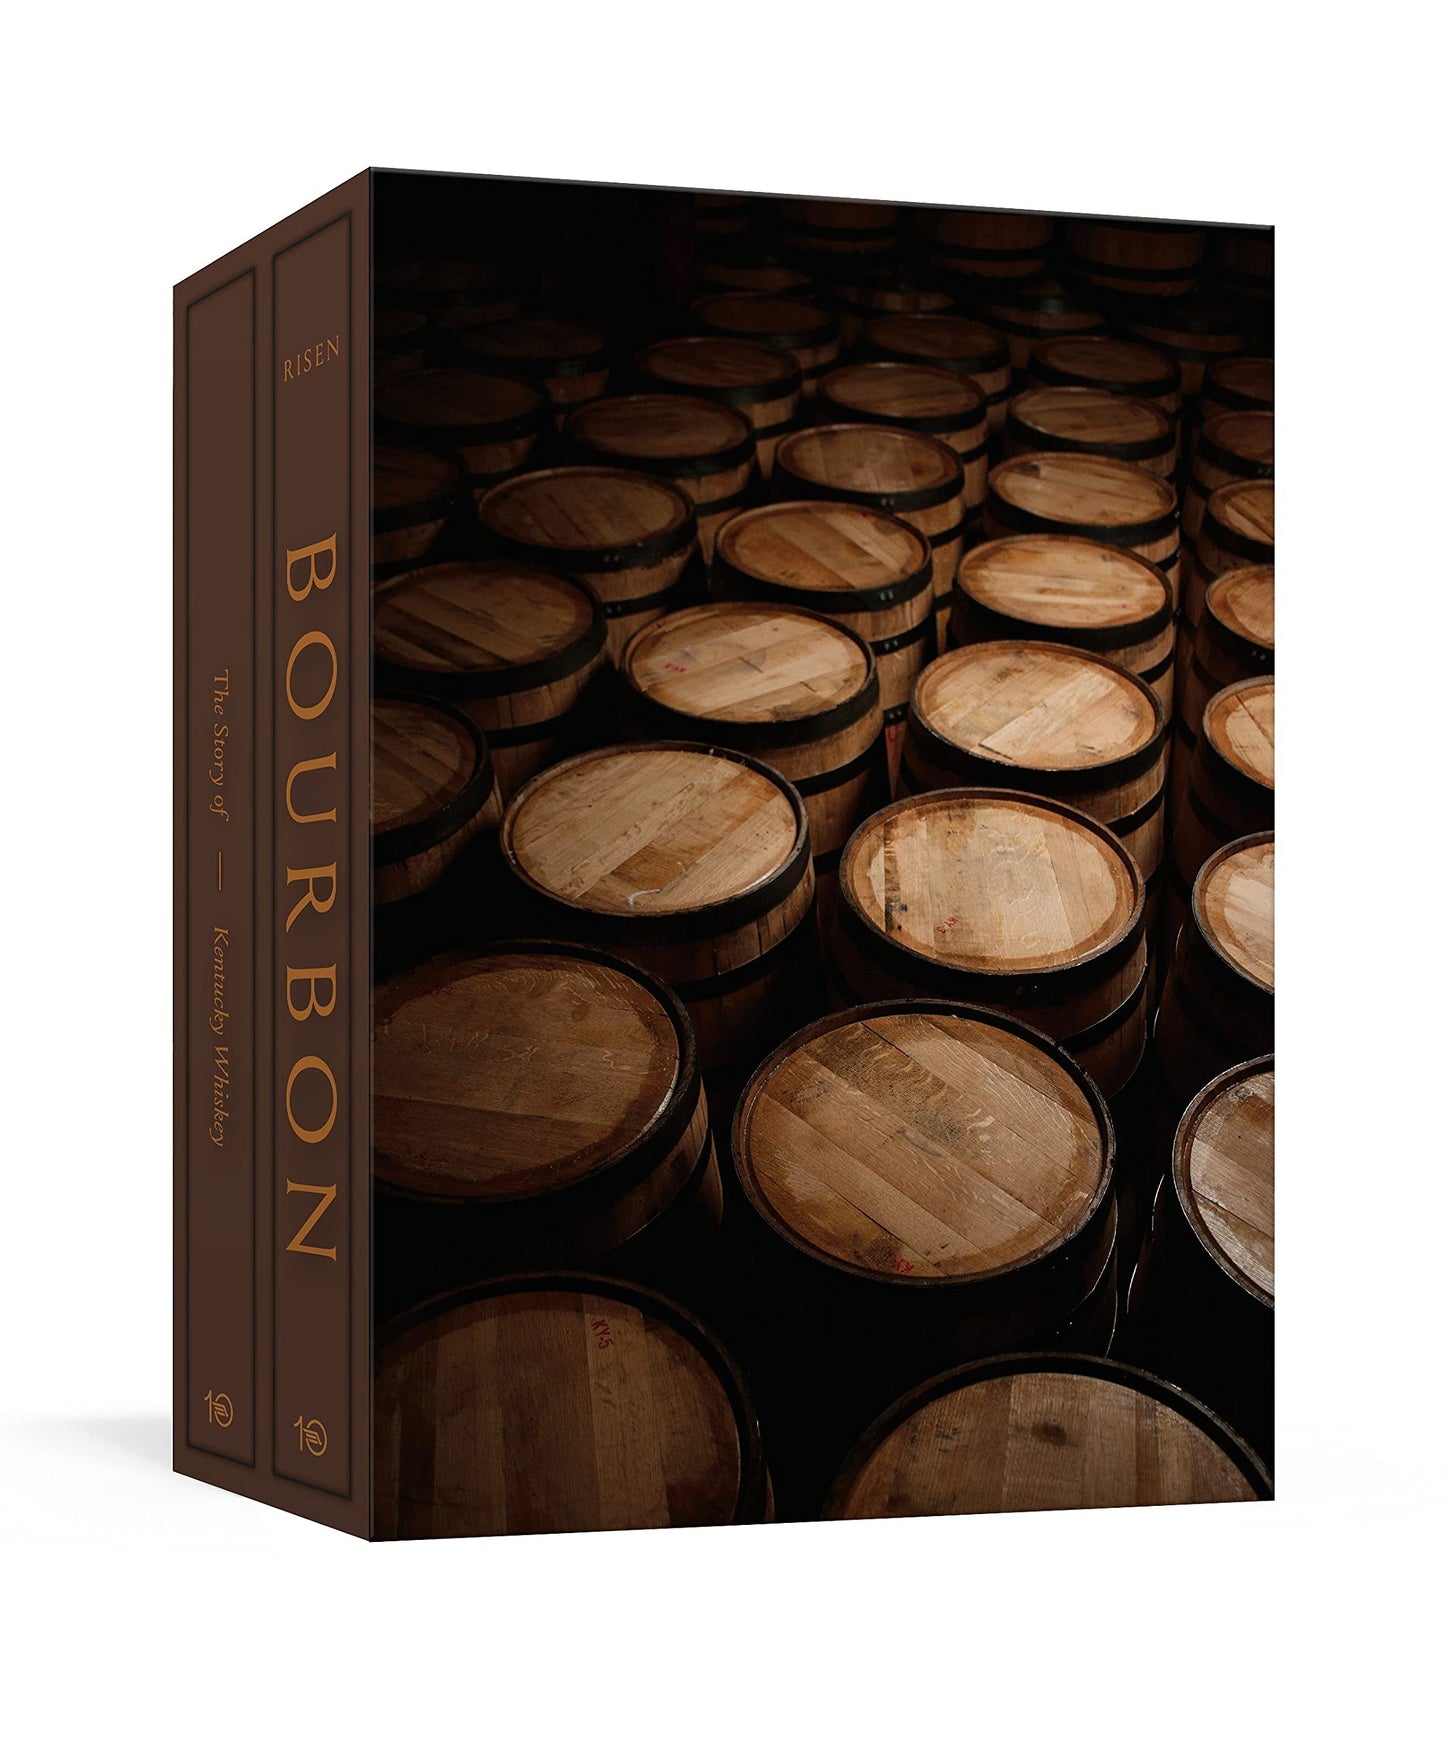 Bourbon - The Complete Guide to the Essential American Spirit